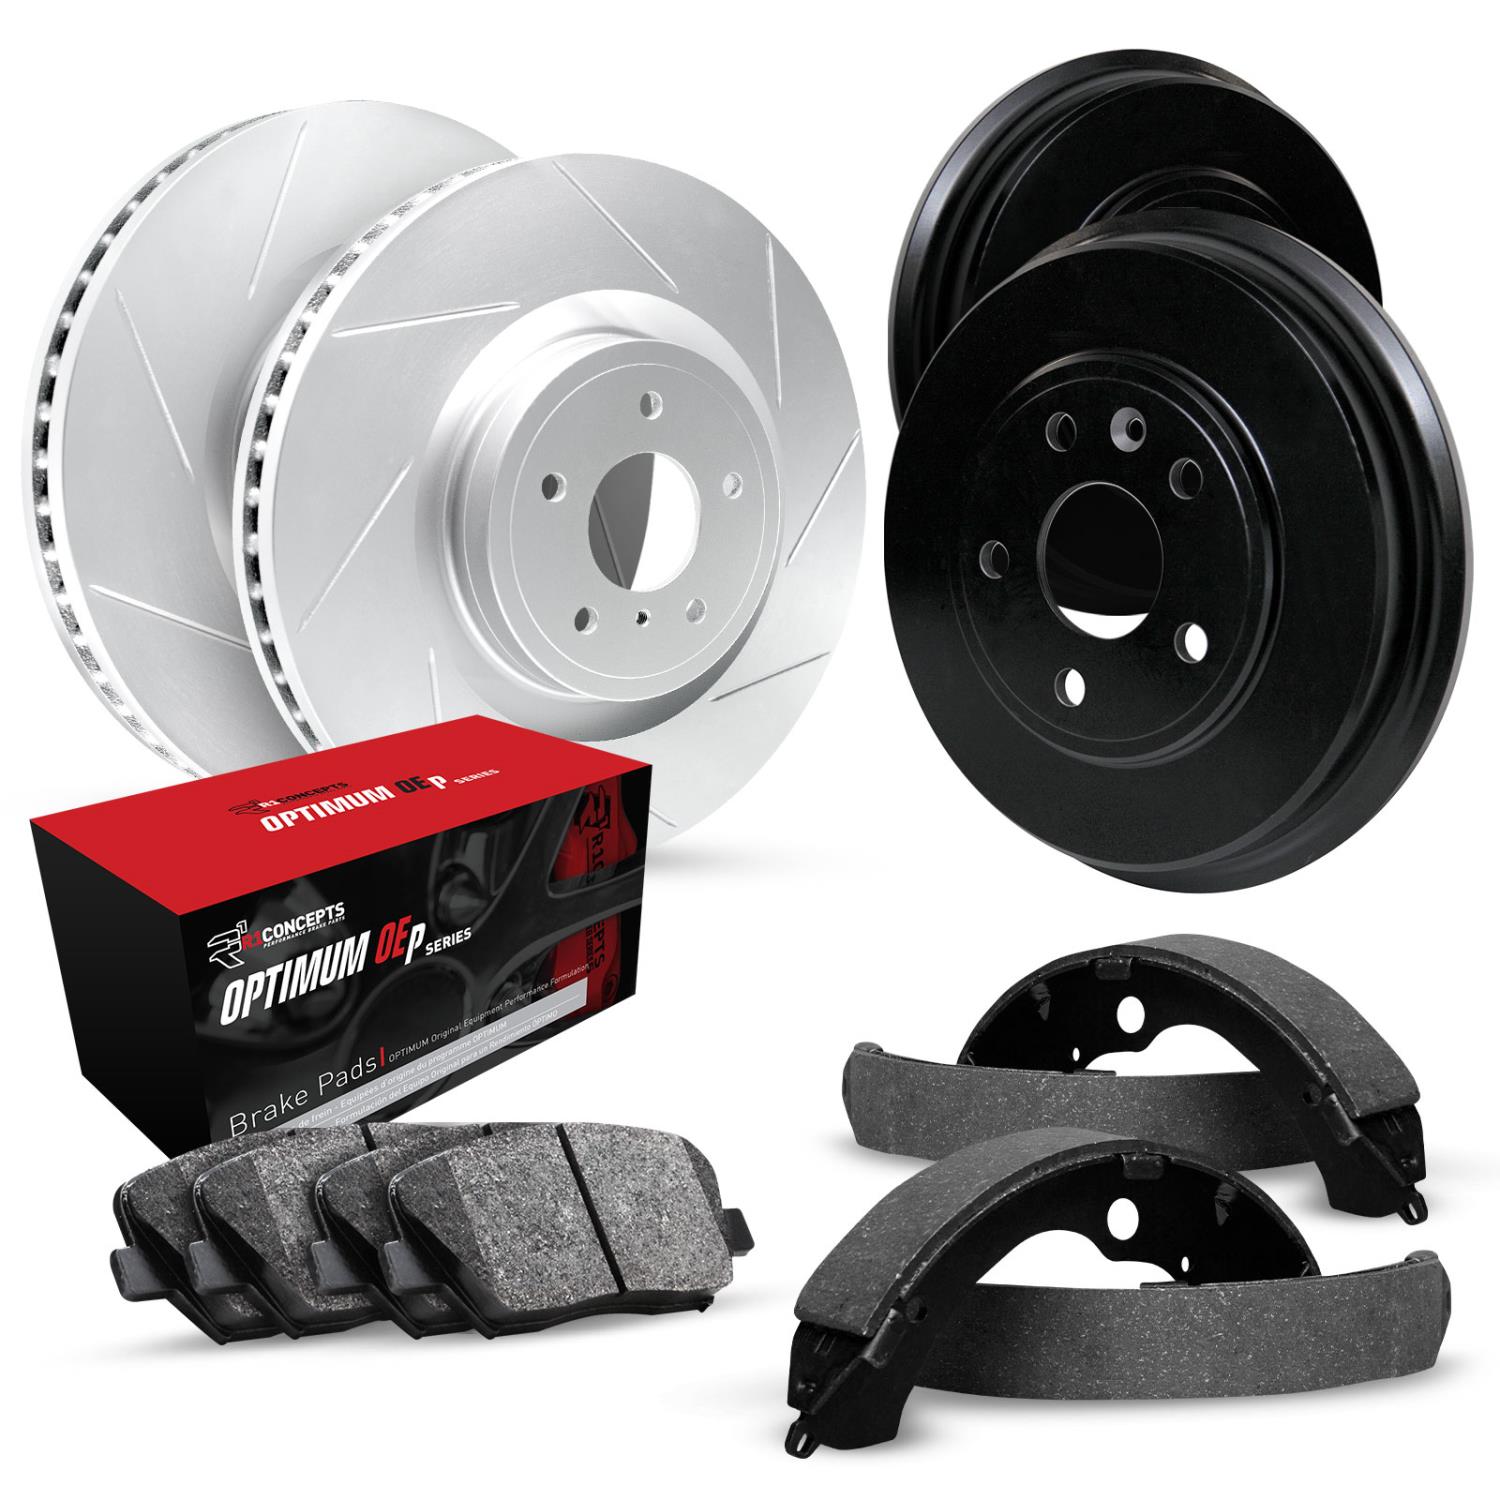 GEO-Carbon Slotted Brake Rotor & Drum Set w/Optimum OE Pads & Shoes, 1994-1995 GM, Position: Front & Rear